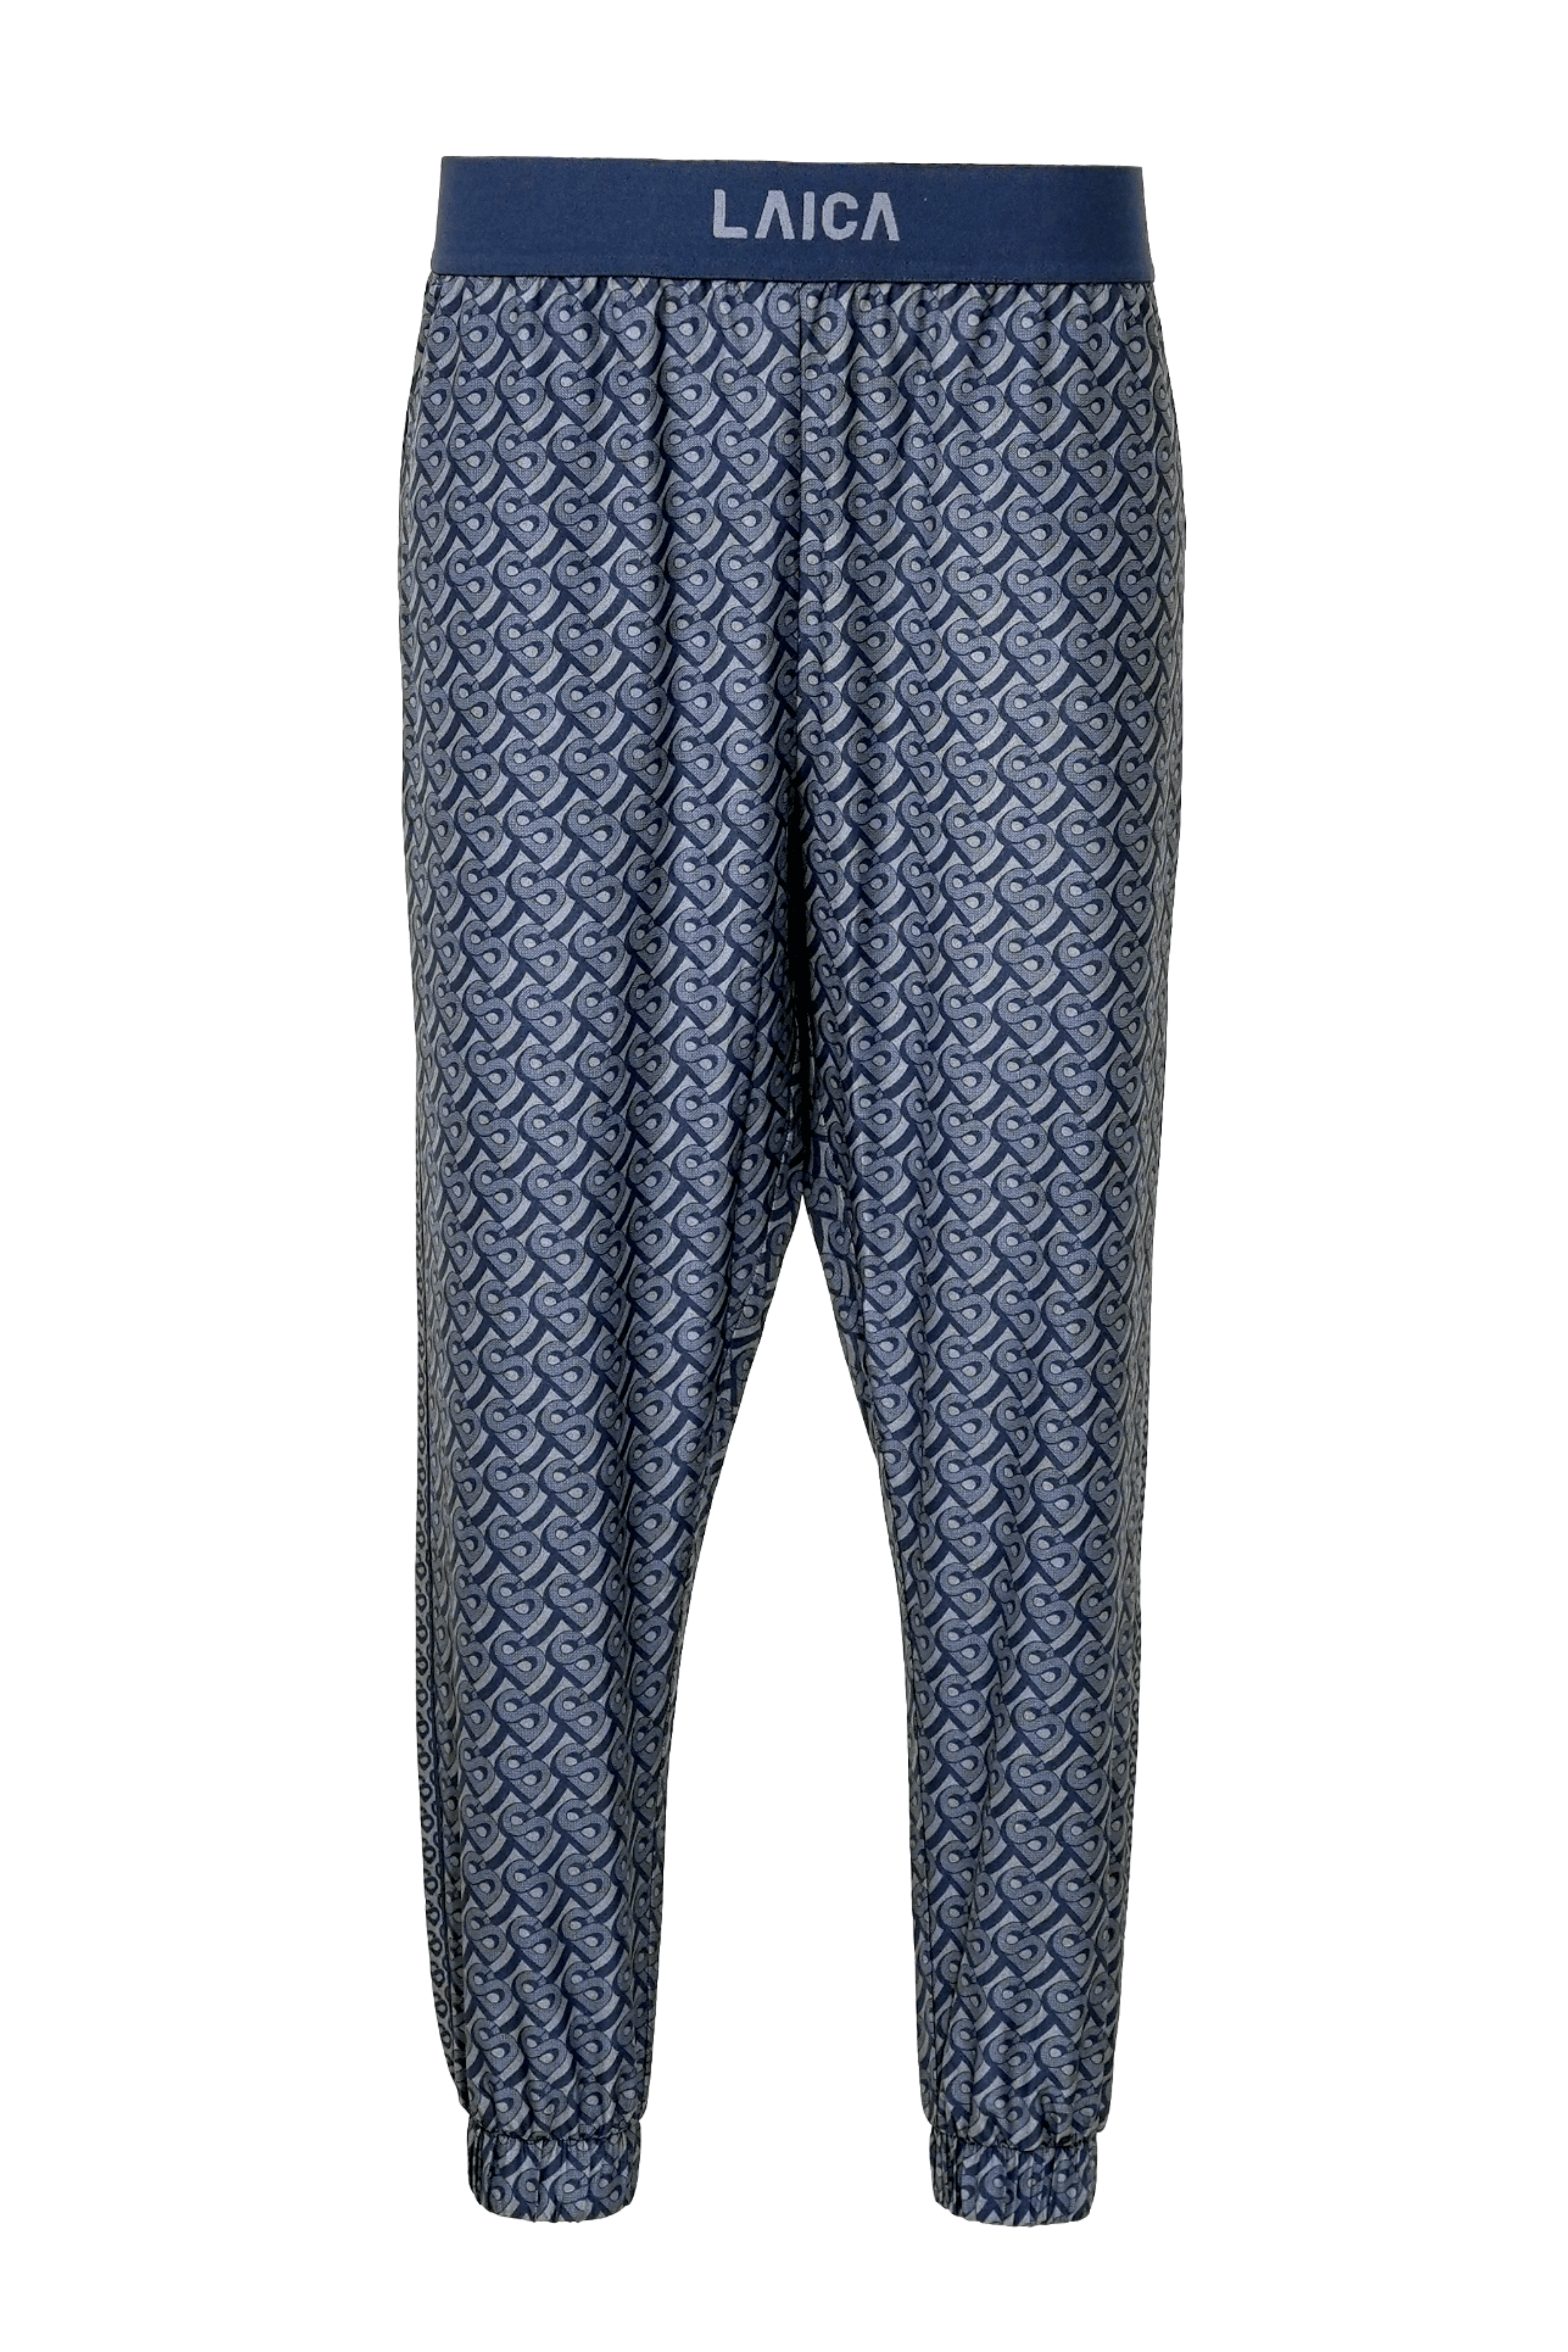 LAICA x Buttonscarves Athleisure Air Jogger - Navy